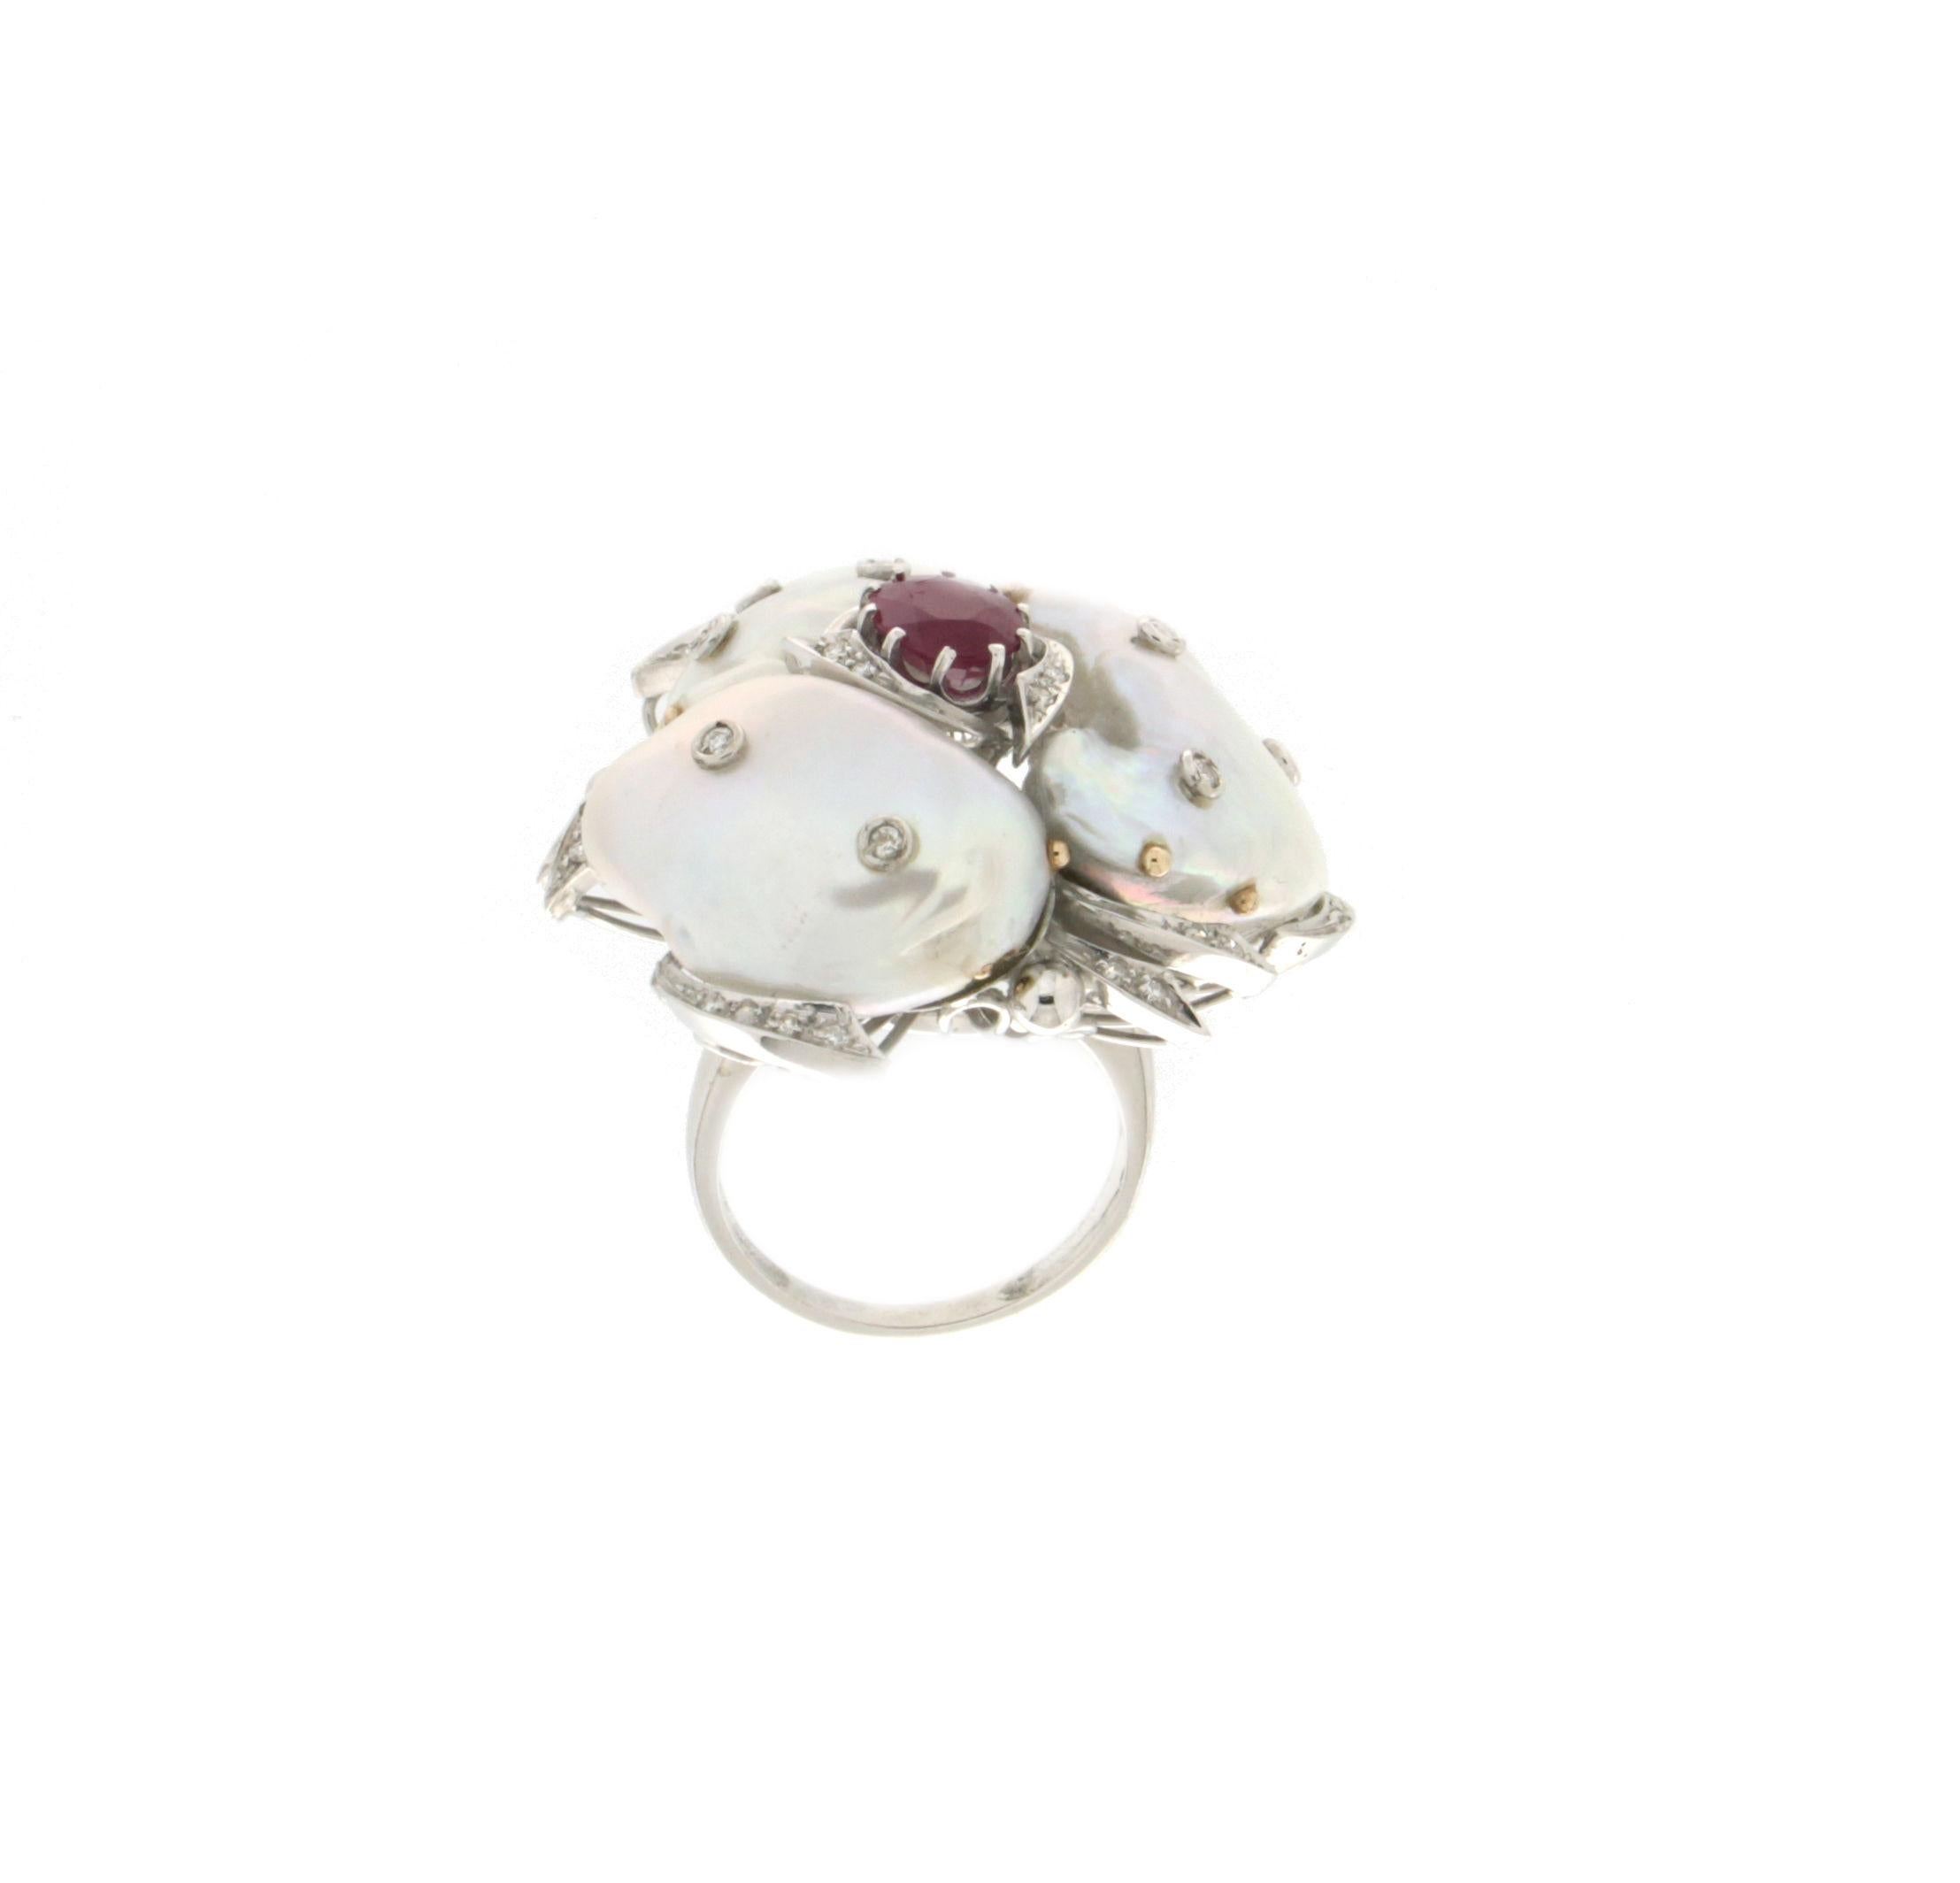 Brilliant Cut Handcraft Baroque Pearls 18 Karat White Gold Diamonds Ruby Cocktail Ring For Sale